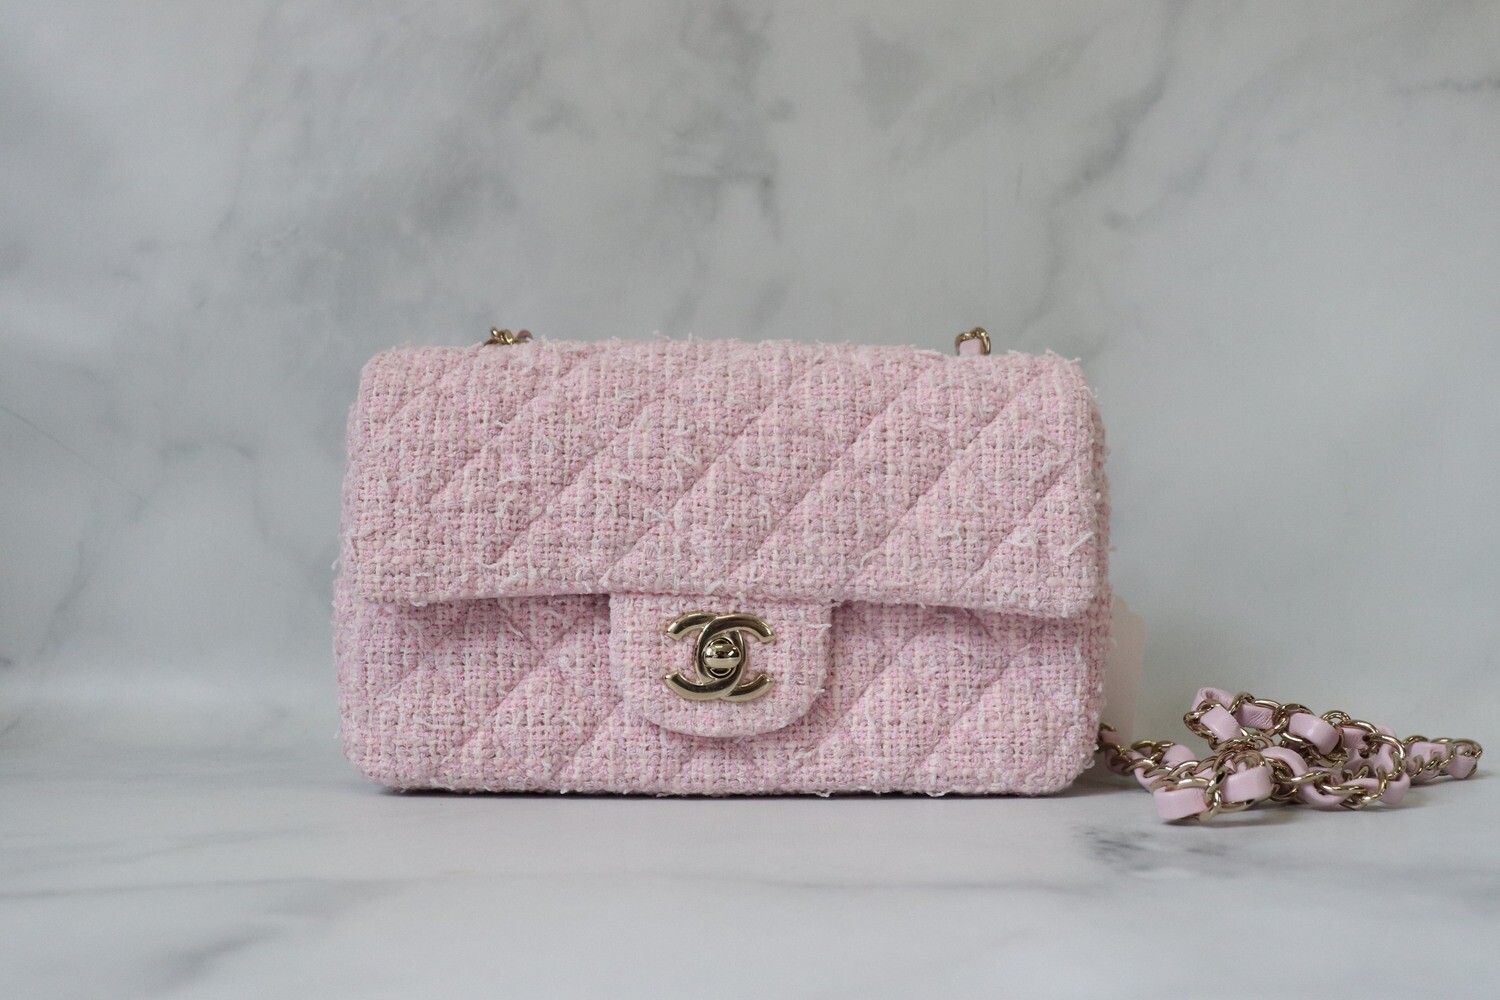 Chanel Mini Rectangle, Pink Tweed, Shiny Light Gold Hardware, New in Box